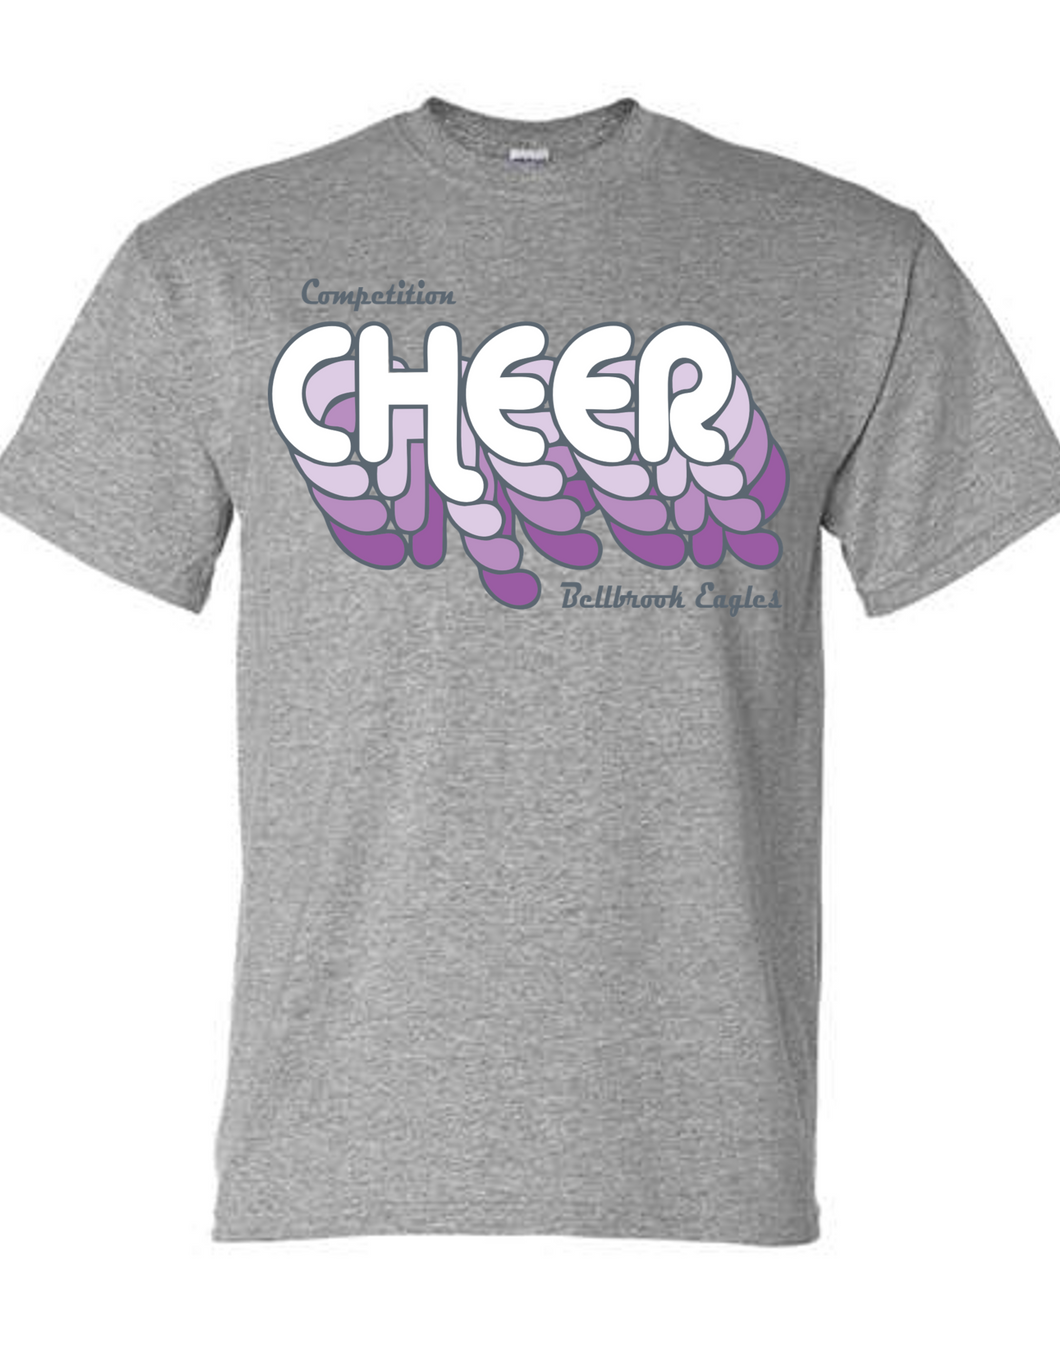 Competition CHEER CHEER CHEER Sport Grey T-Shirt